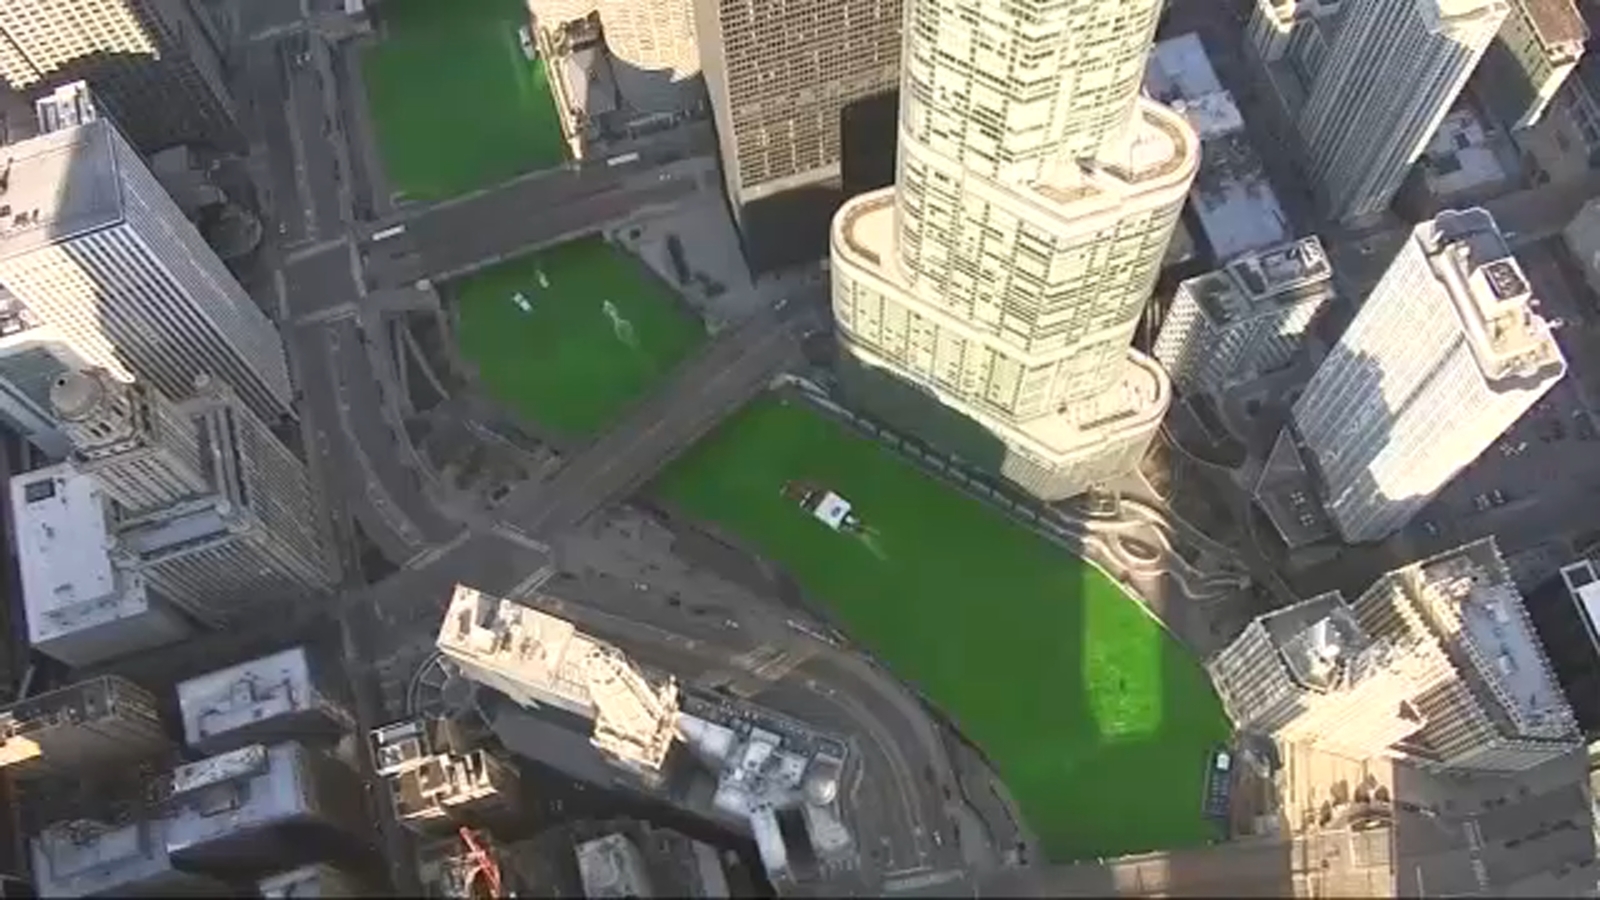 Chicago River dyeing 2021: Green makes appearance for toned down St. Patrick's Day celebrations